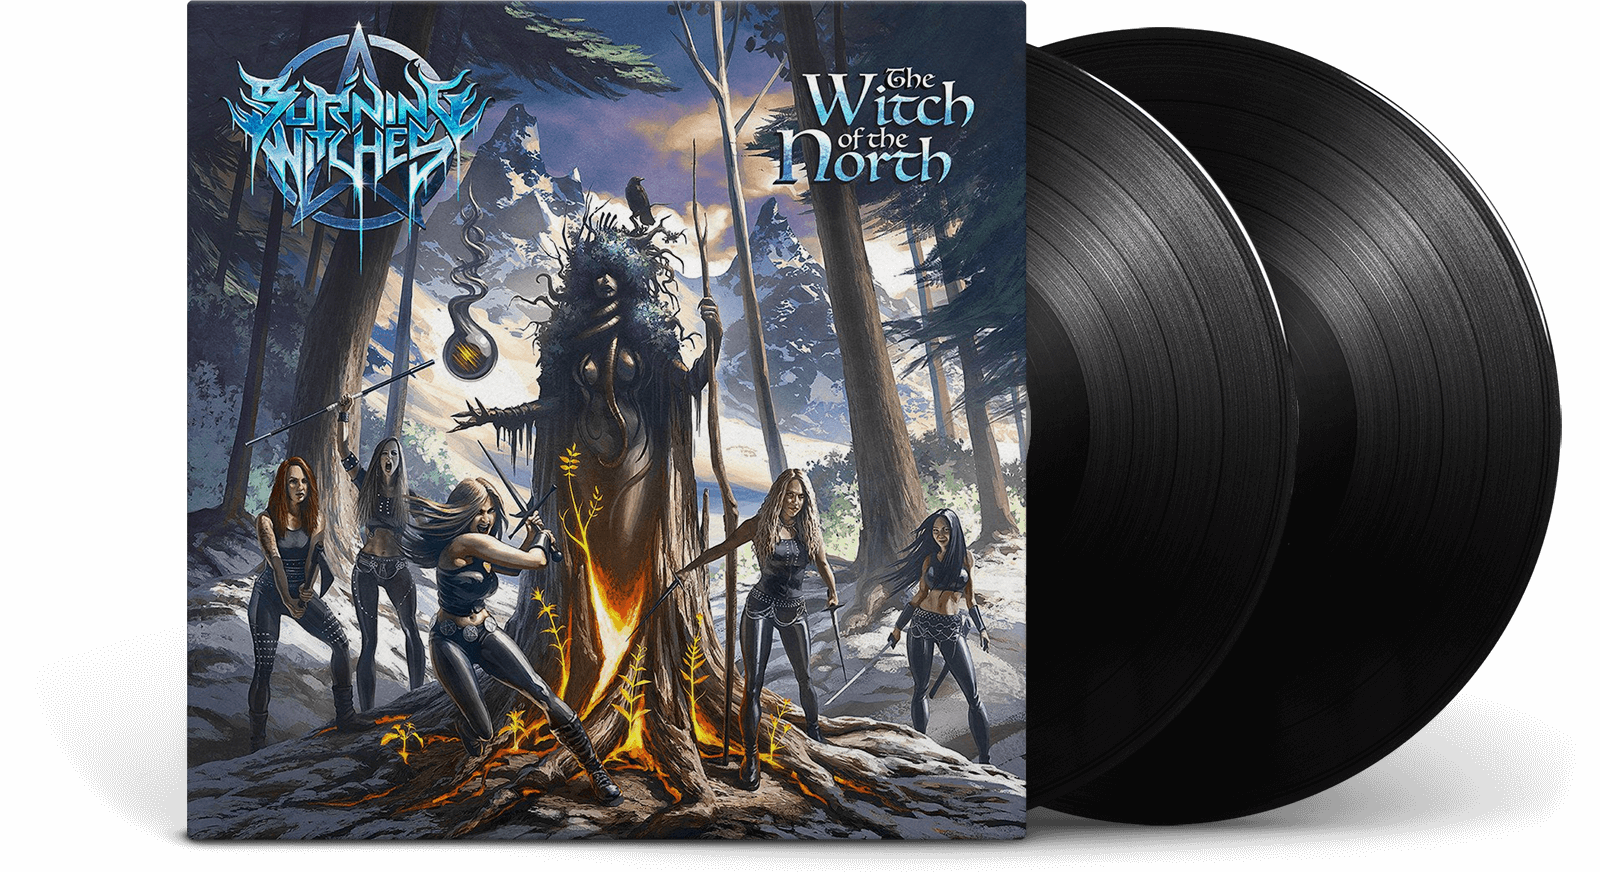 Gatefold　Vinyl　Witch　Burning　The　North　Vinyl)　Witches　The　Of　Hub　The　(Limited　Double　Record